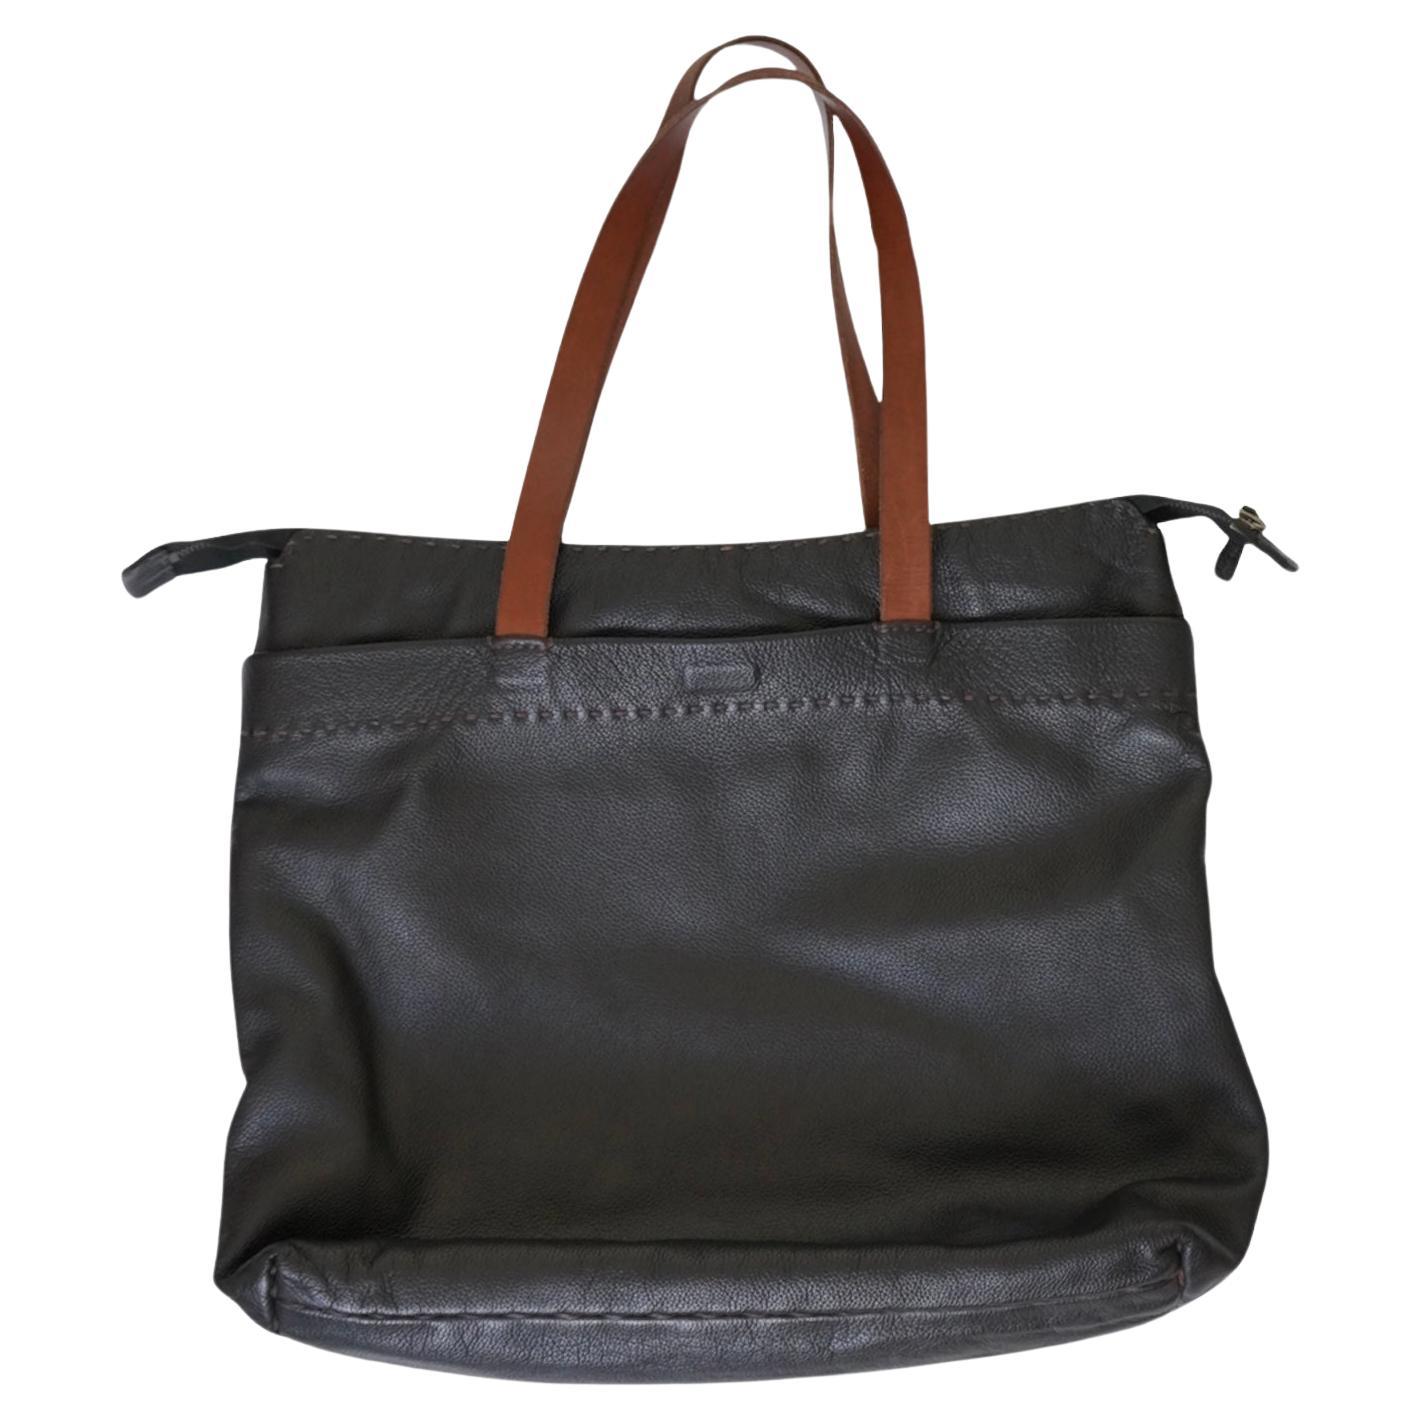 Henry Cuir Black Leather Tote Bag  For Sale